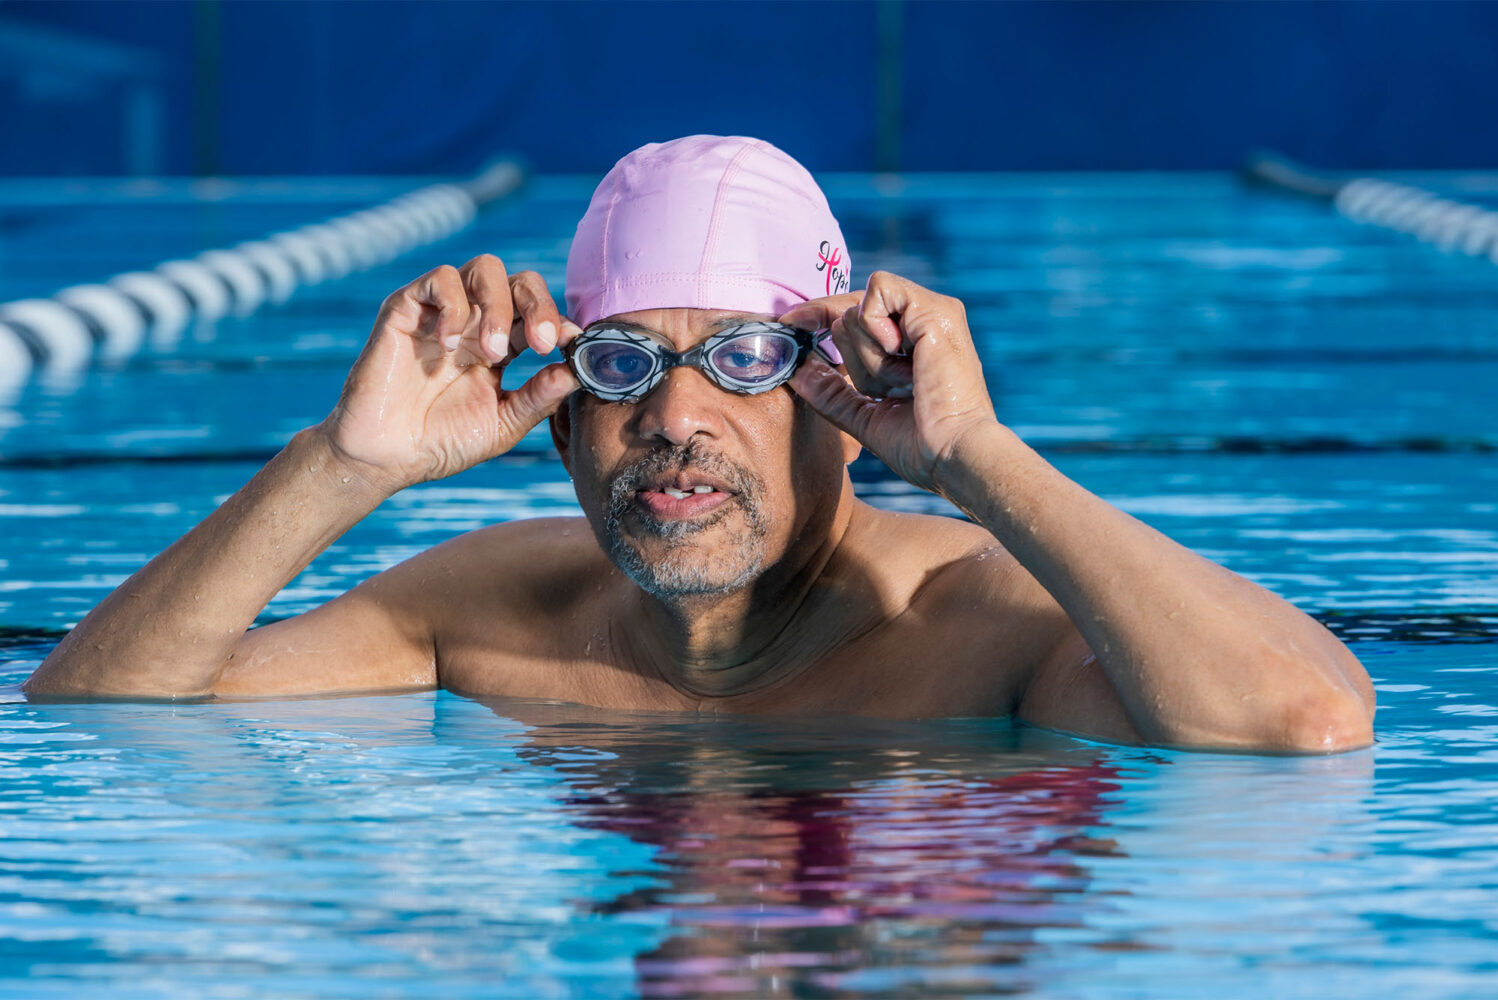 Photo: An older black man wearing goggles and a swim cap poses for a portrait in a pool